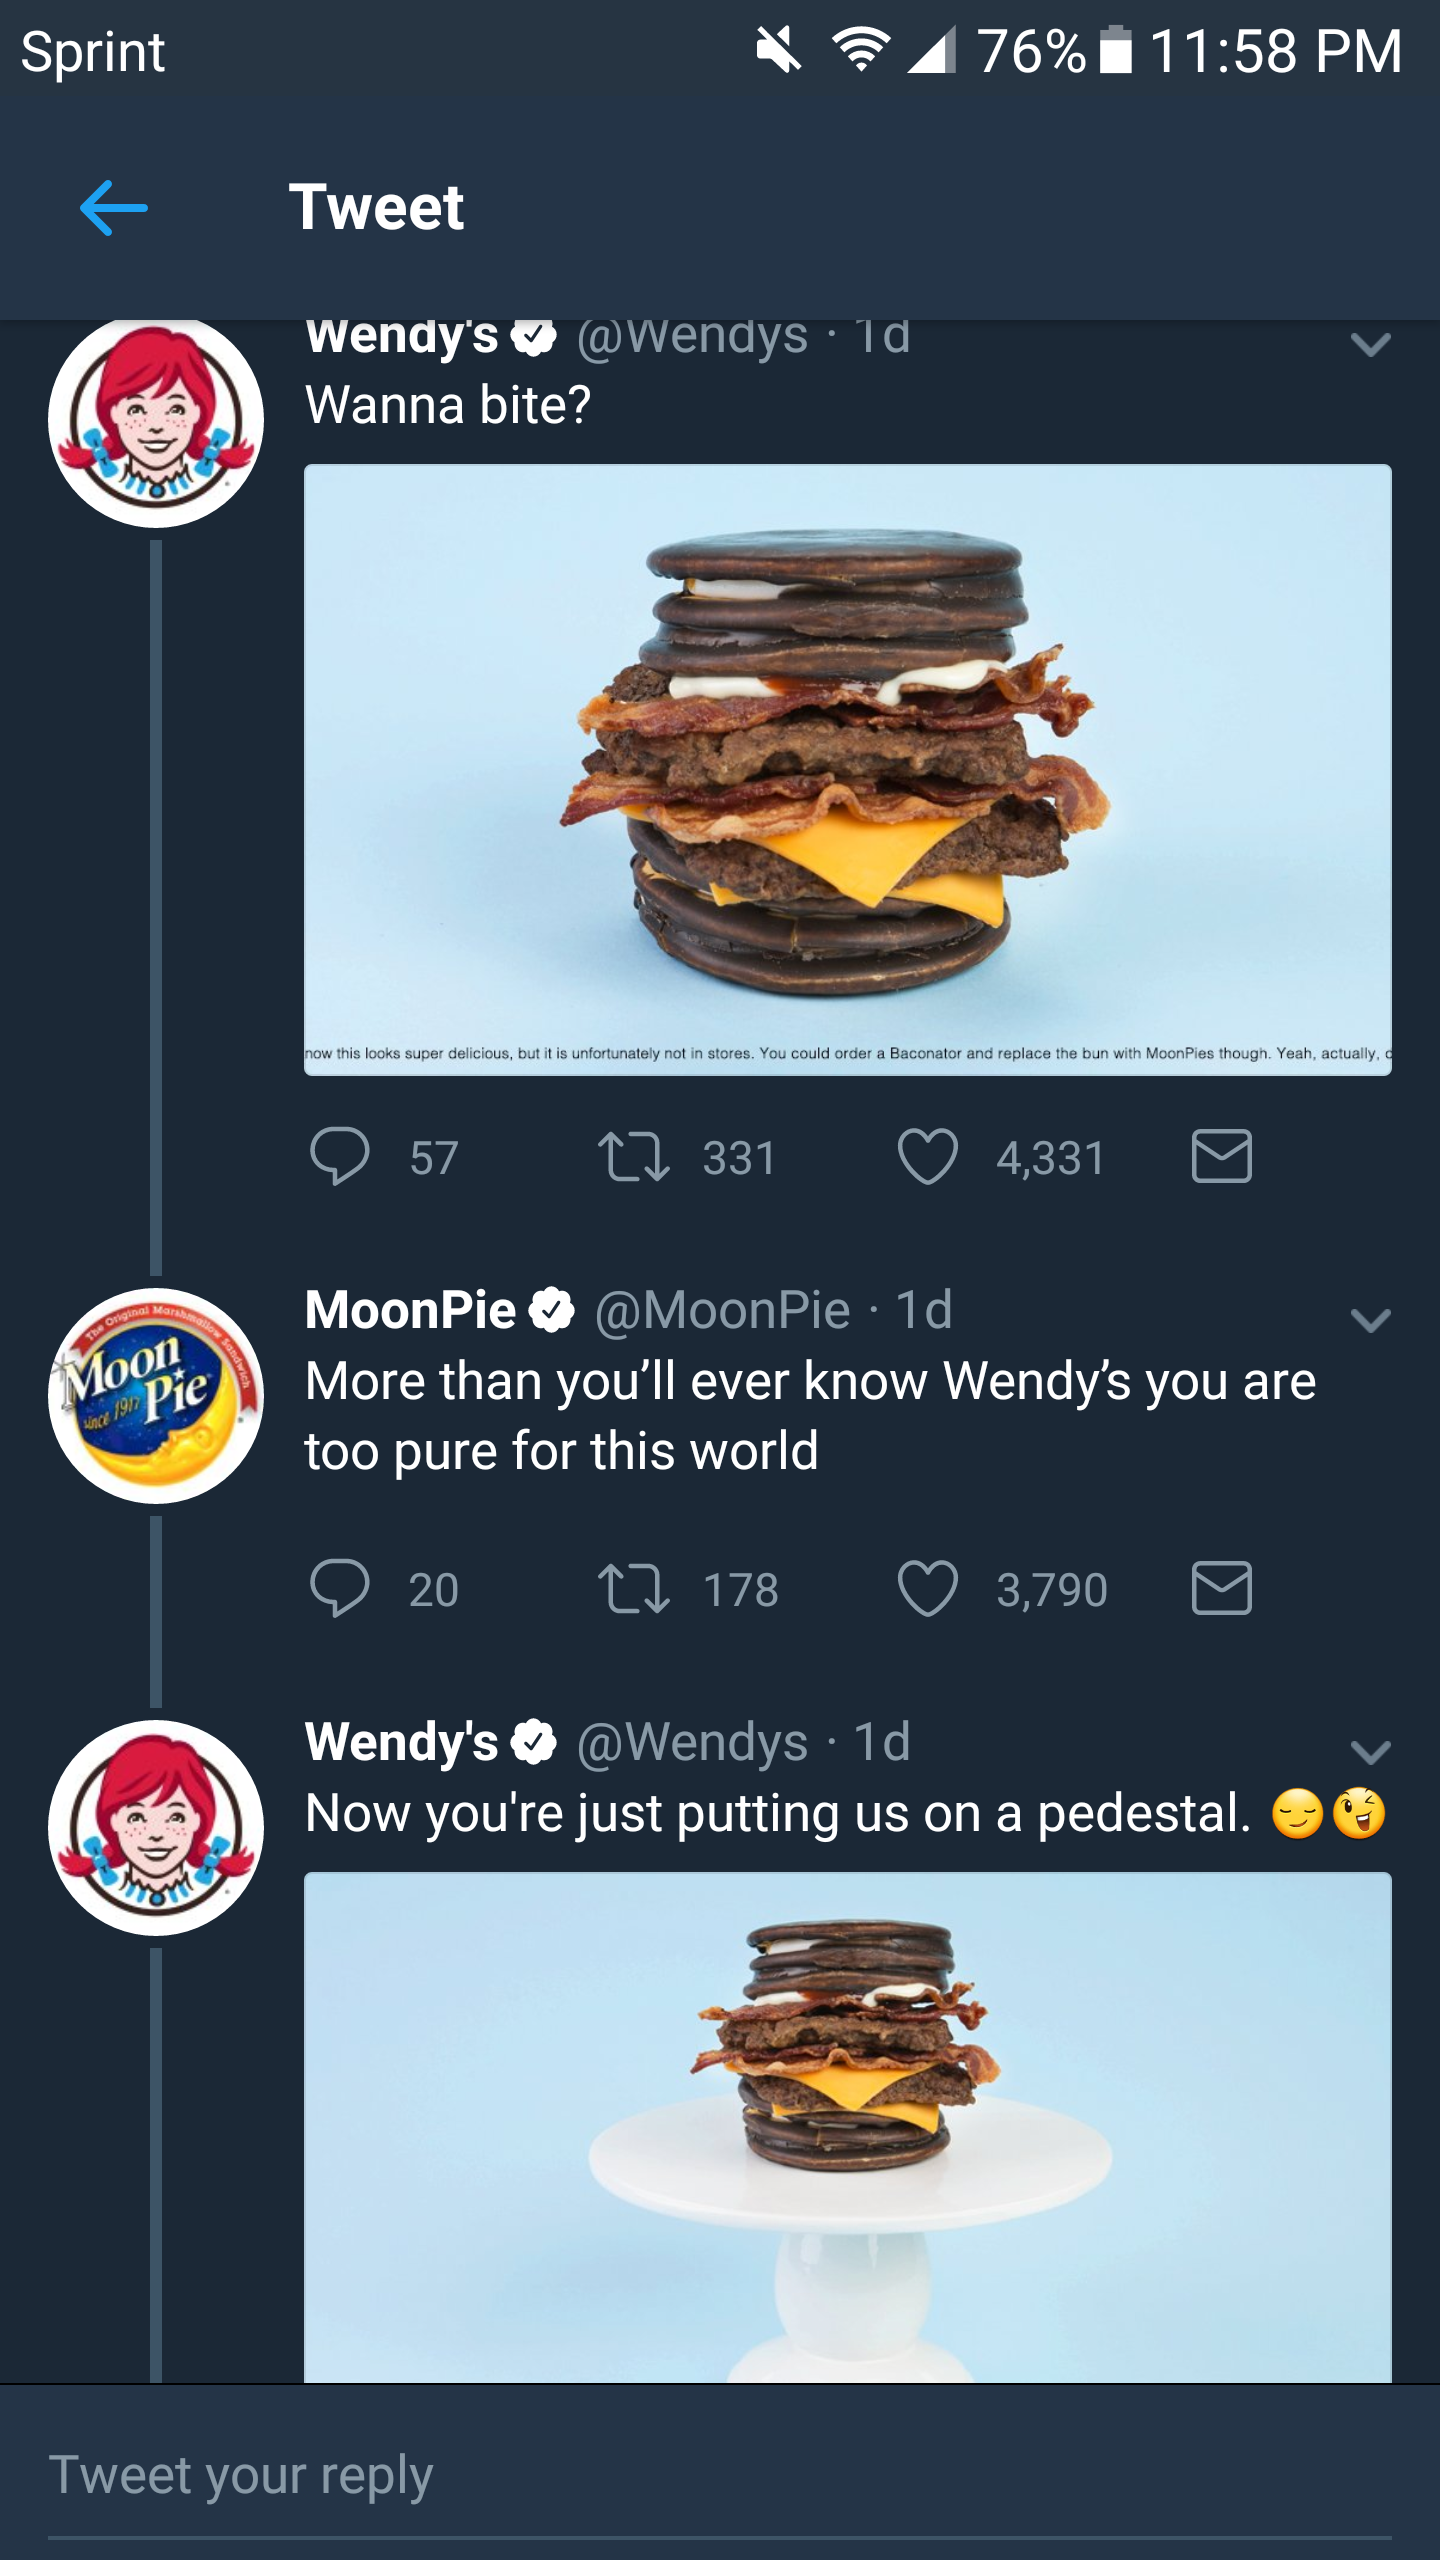 screenshot - Sprint $476% Tweet Wendys Wendys 10 Wanna bite? O 57 17 3314,3319 MoonPie 1d More than you'll ever know Wendy's you are too pure for this world 2017. 178 3,7909 Wendy's 1d Now you're just putting us on a pedestal Tweet your